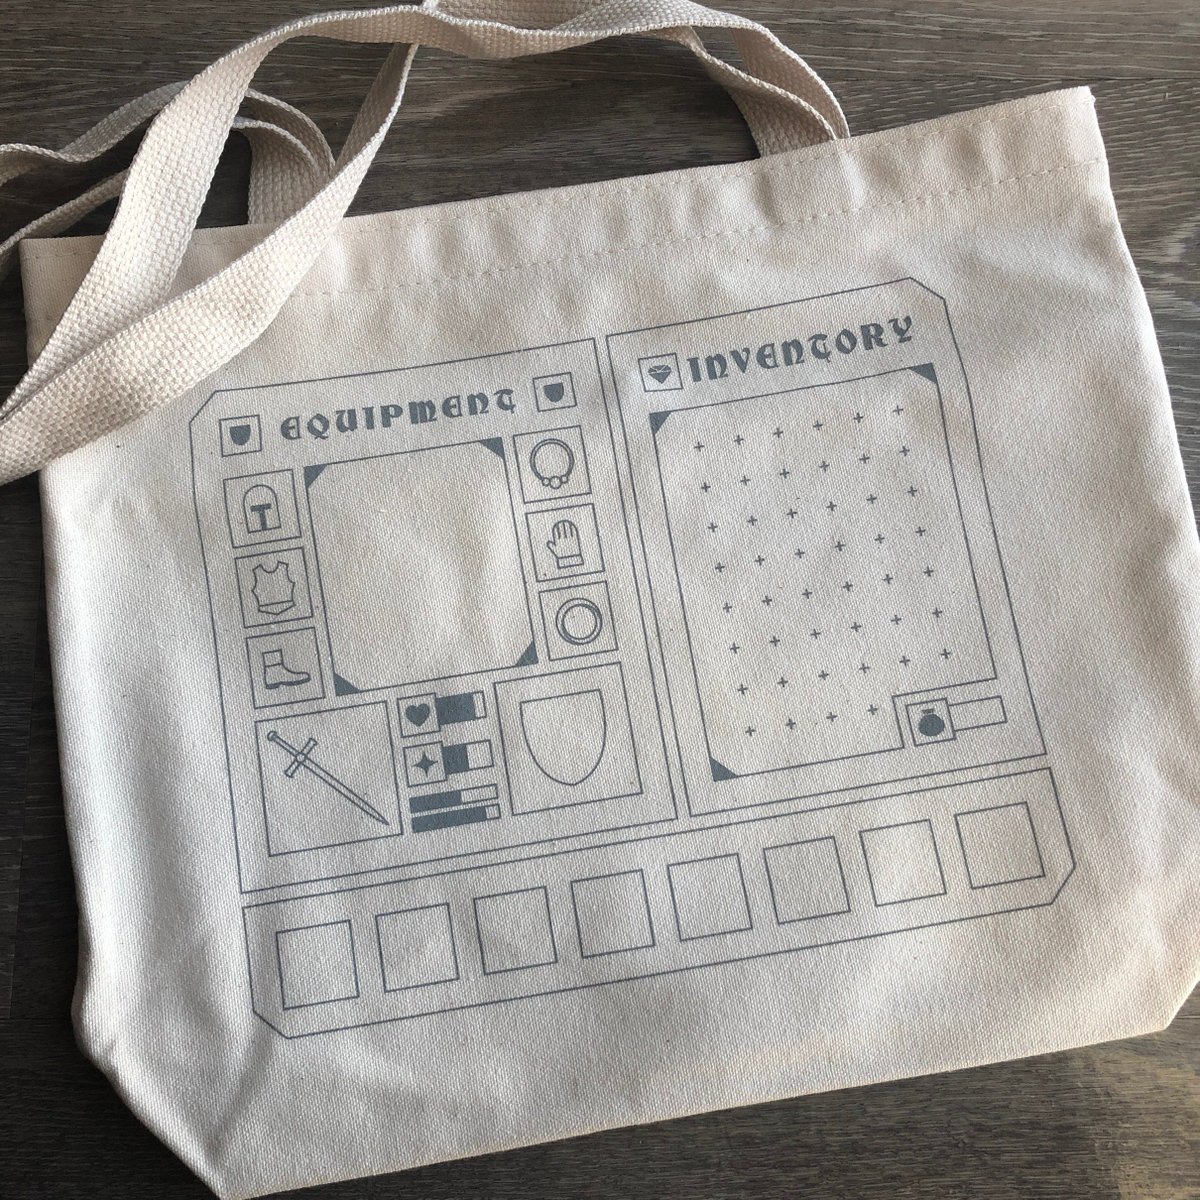 Next is a screen printed tote bag designed for displaying pins! A divider sewn into the bag protects the pin backs from the rest of the bag's contents. Made with recycled canvas, measures 14x12' (conveniently the perfect size for tabletop books.) emilycheeseman.myshopify.com/products/equip…